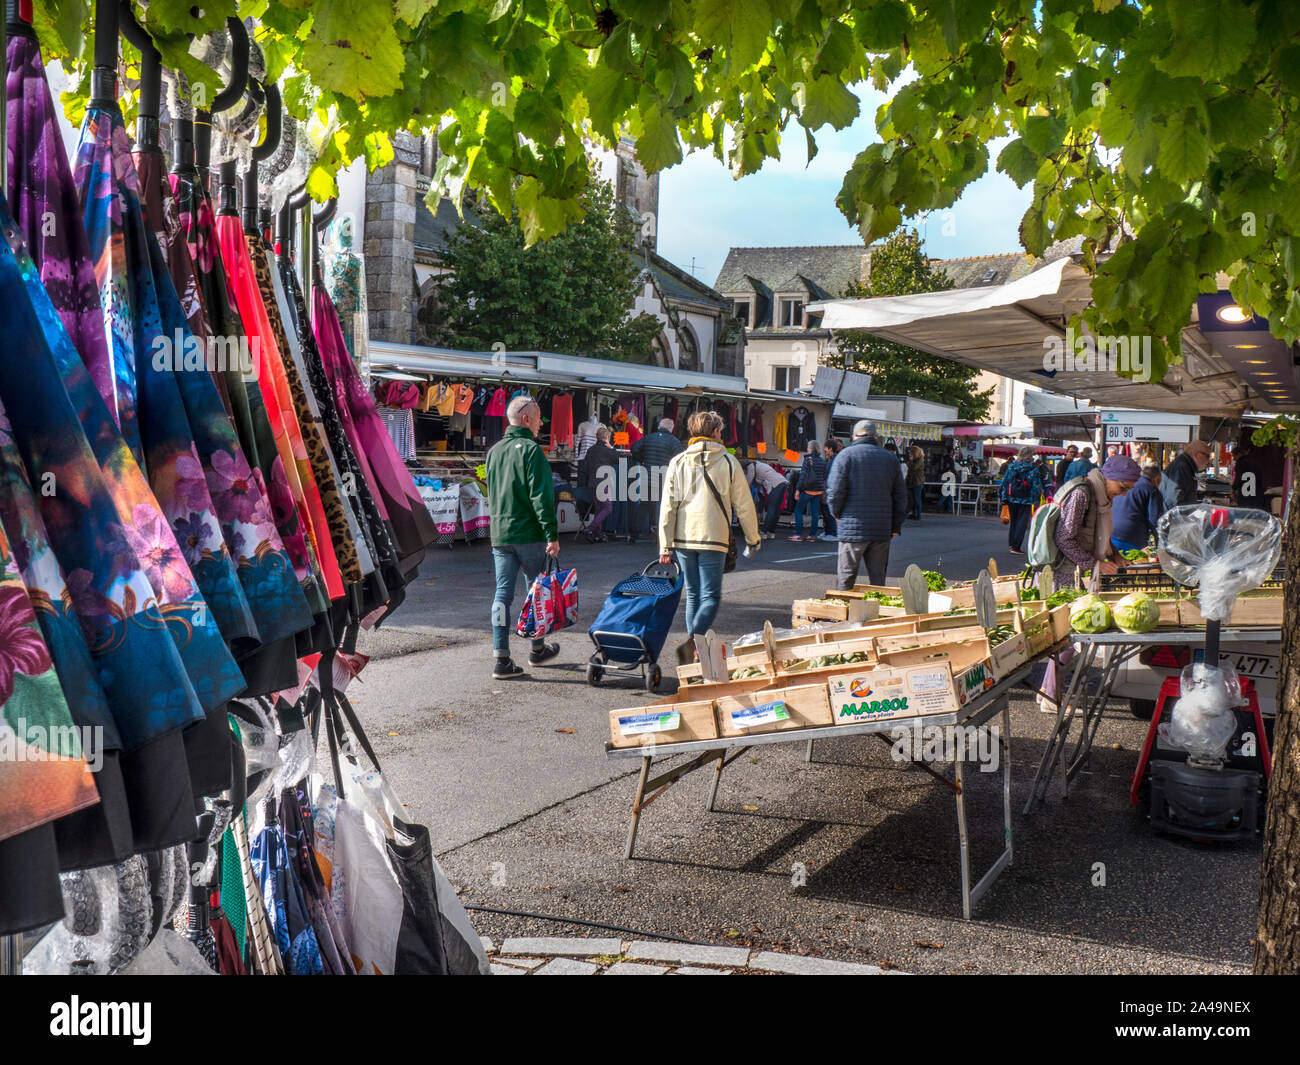 FRANCE VILLAGE STREET MARKET Moëlan sur Mer Market Brittany small charming local French church square weekly general produce/clothing market.  The life blood of the local community Brittany France Stock Photo